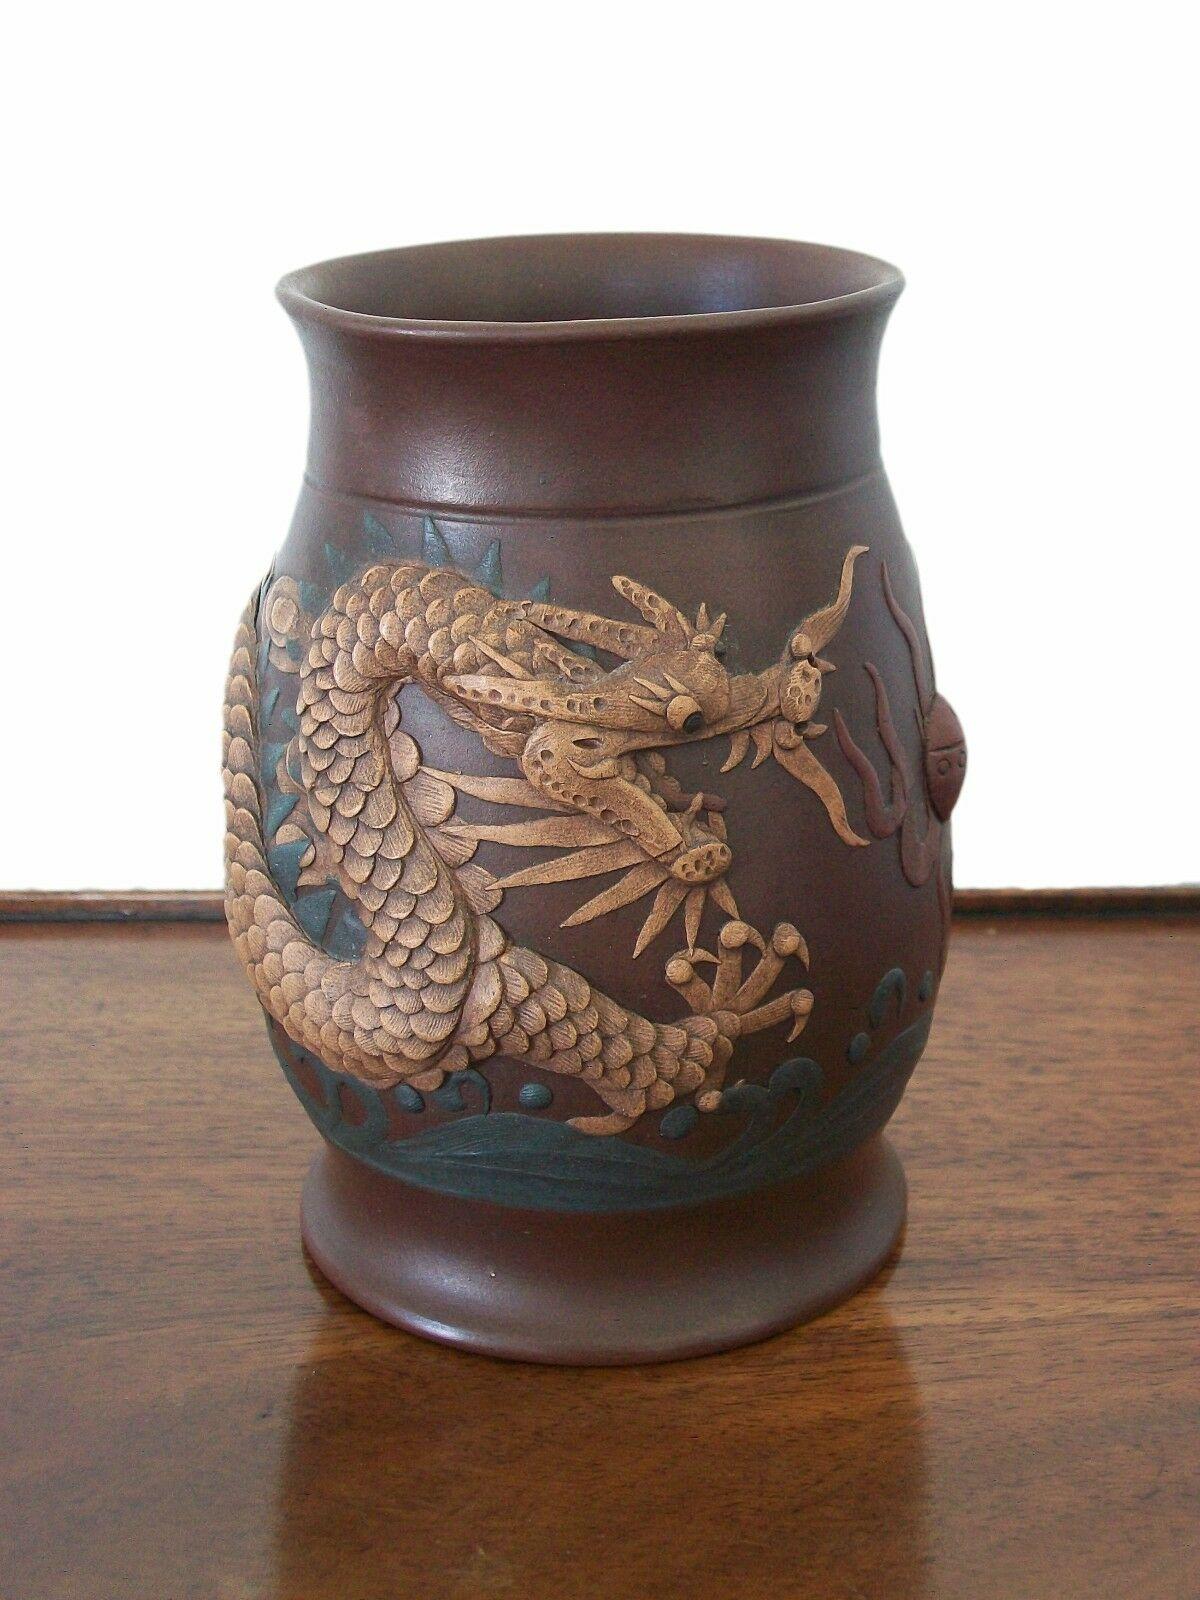 Rare museum quality Yixing Zisha 'Imperial Dragon' vase or brush pot - featuring an applied buff clay five clawed/twin horned scaly dragon in high relief chasing a flaming pearl of wisdom set against clouds and lapping waves - impressed square seal